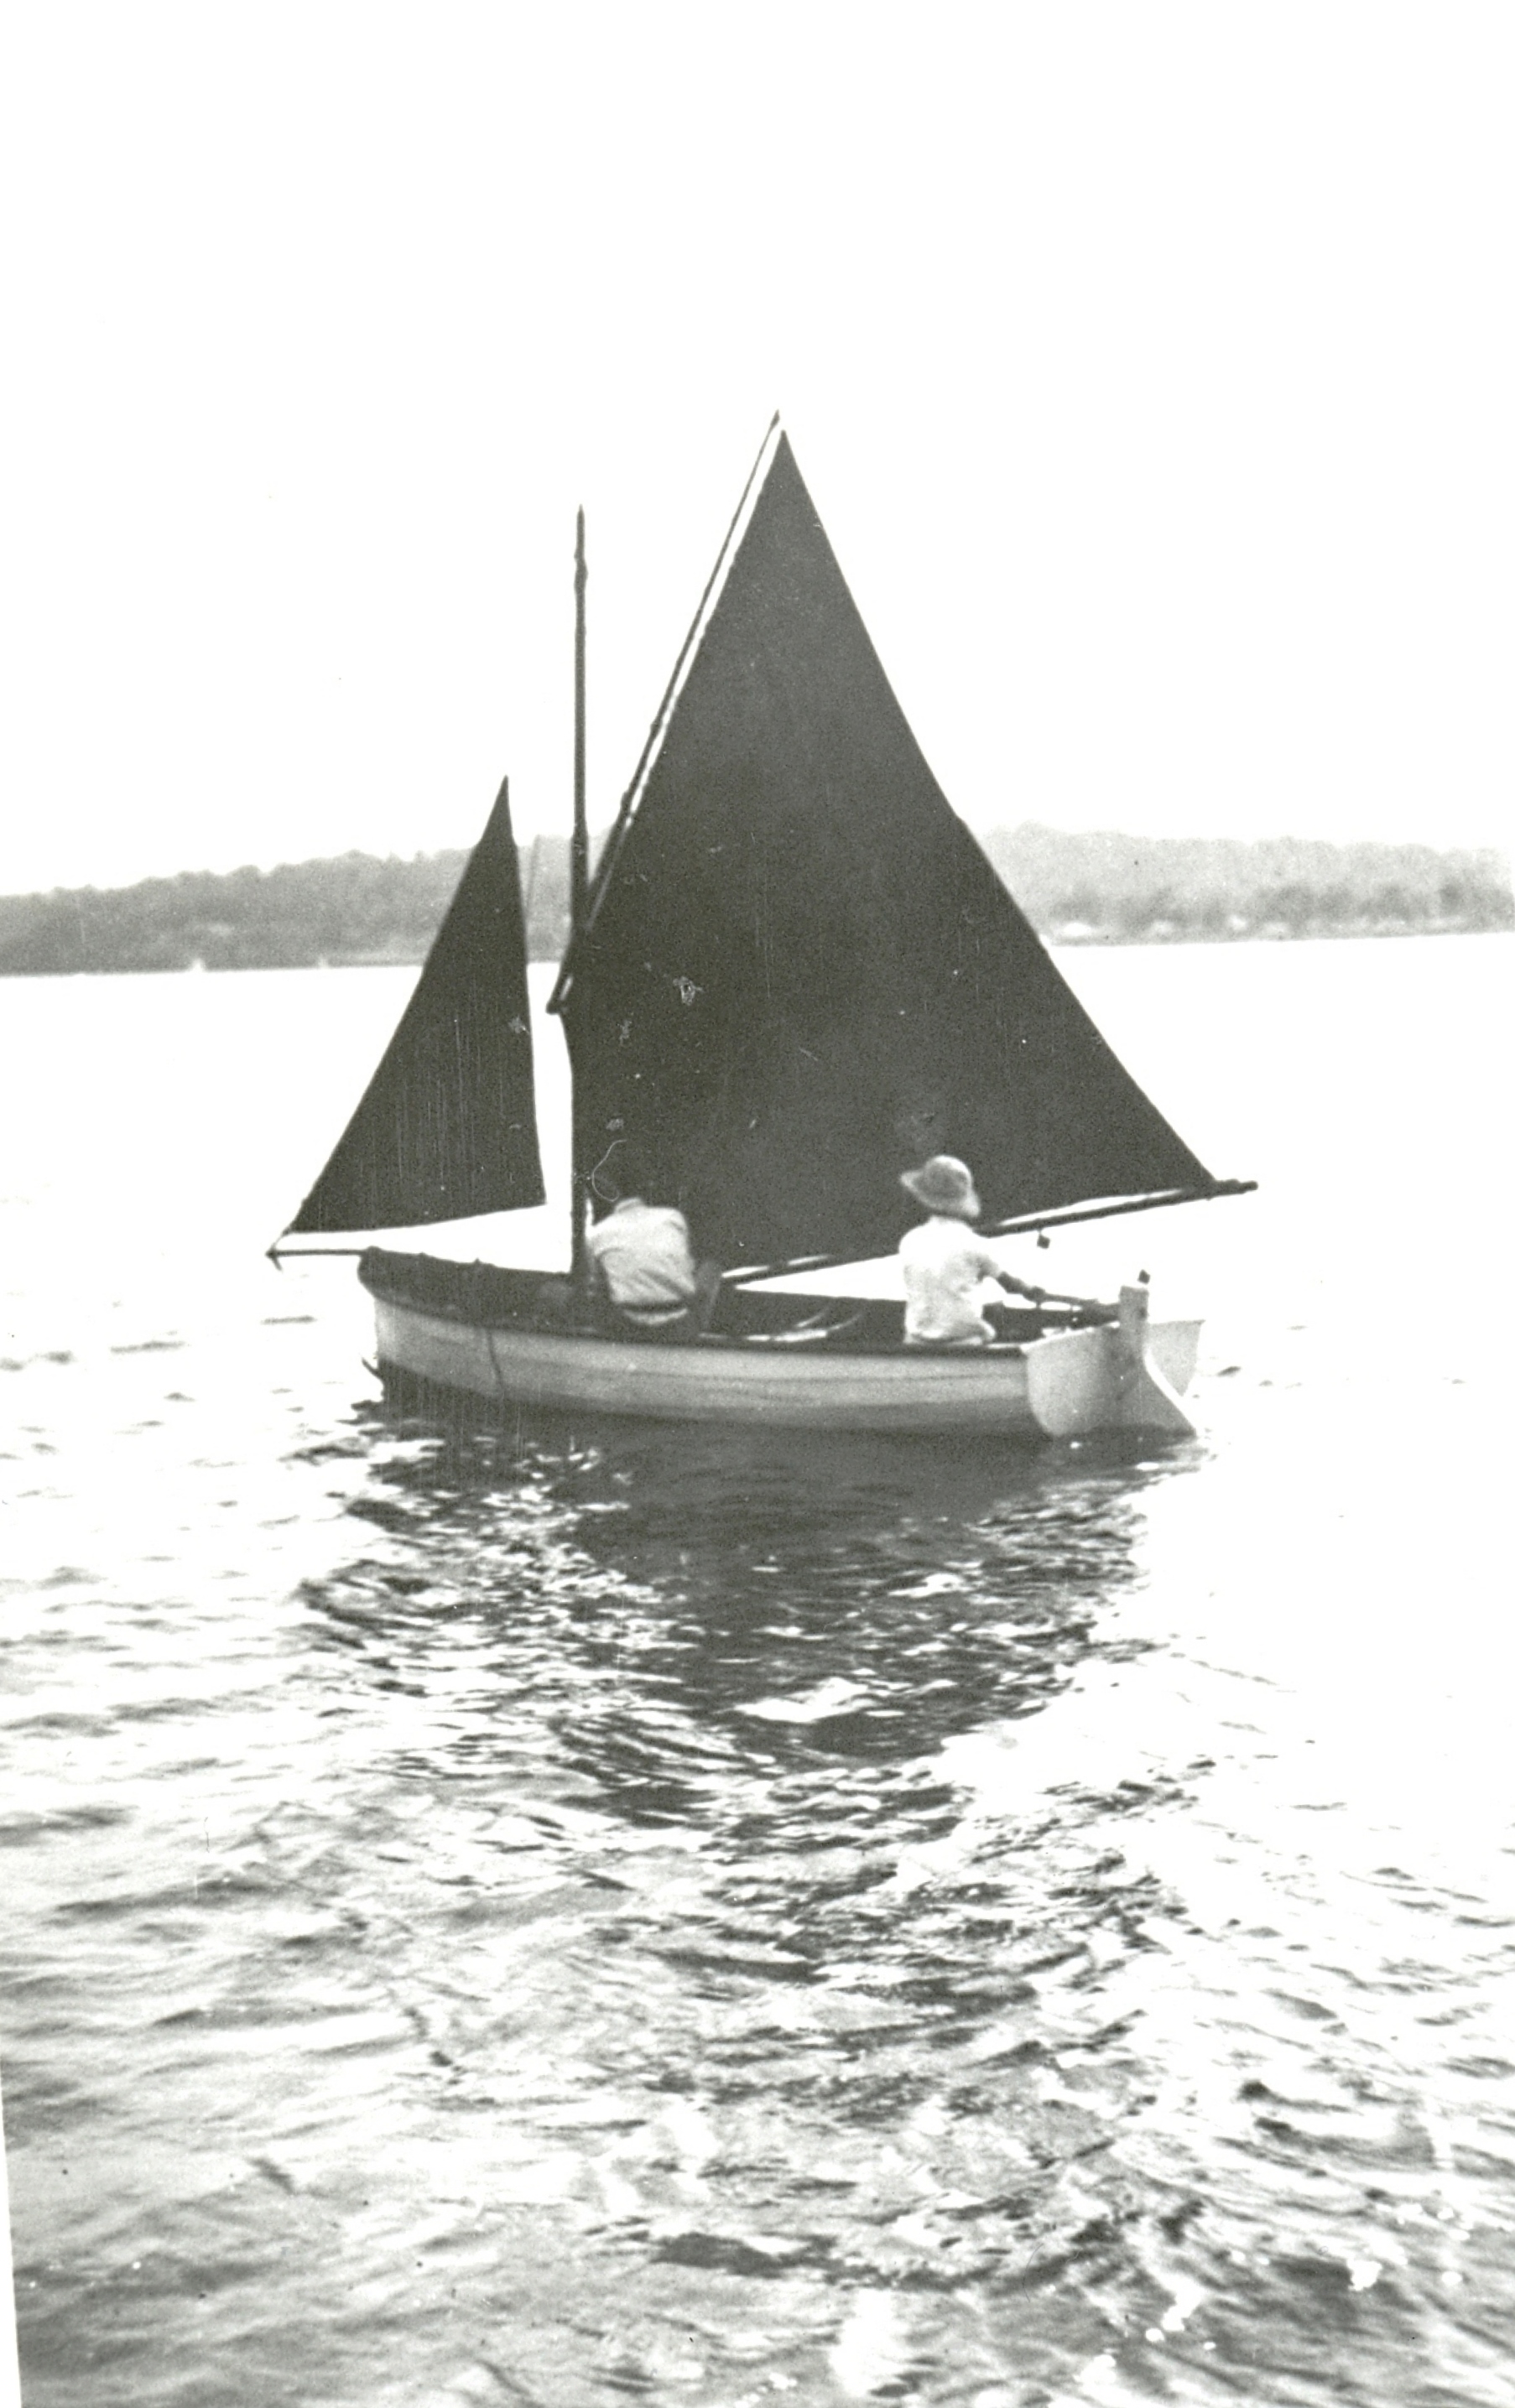 Sailboat 'Pip' sailing on lake, Speers Point, 1940, Neville Edwards, skipper, and Warwick Odgers, crew. Photographer unknown – Lake Macquarie Community Heritage Photography collection.